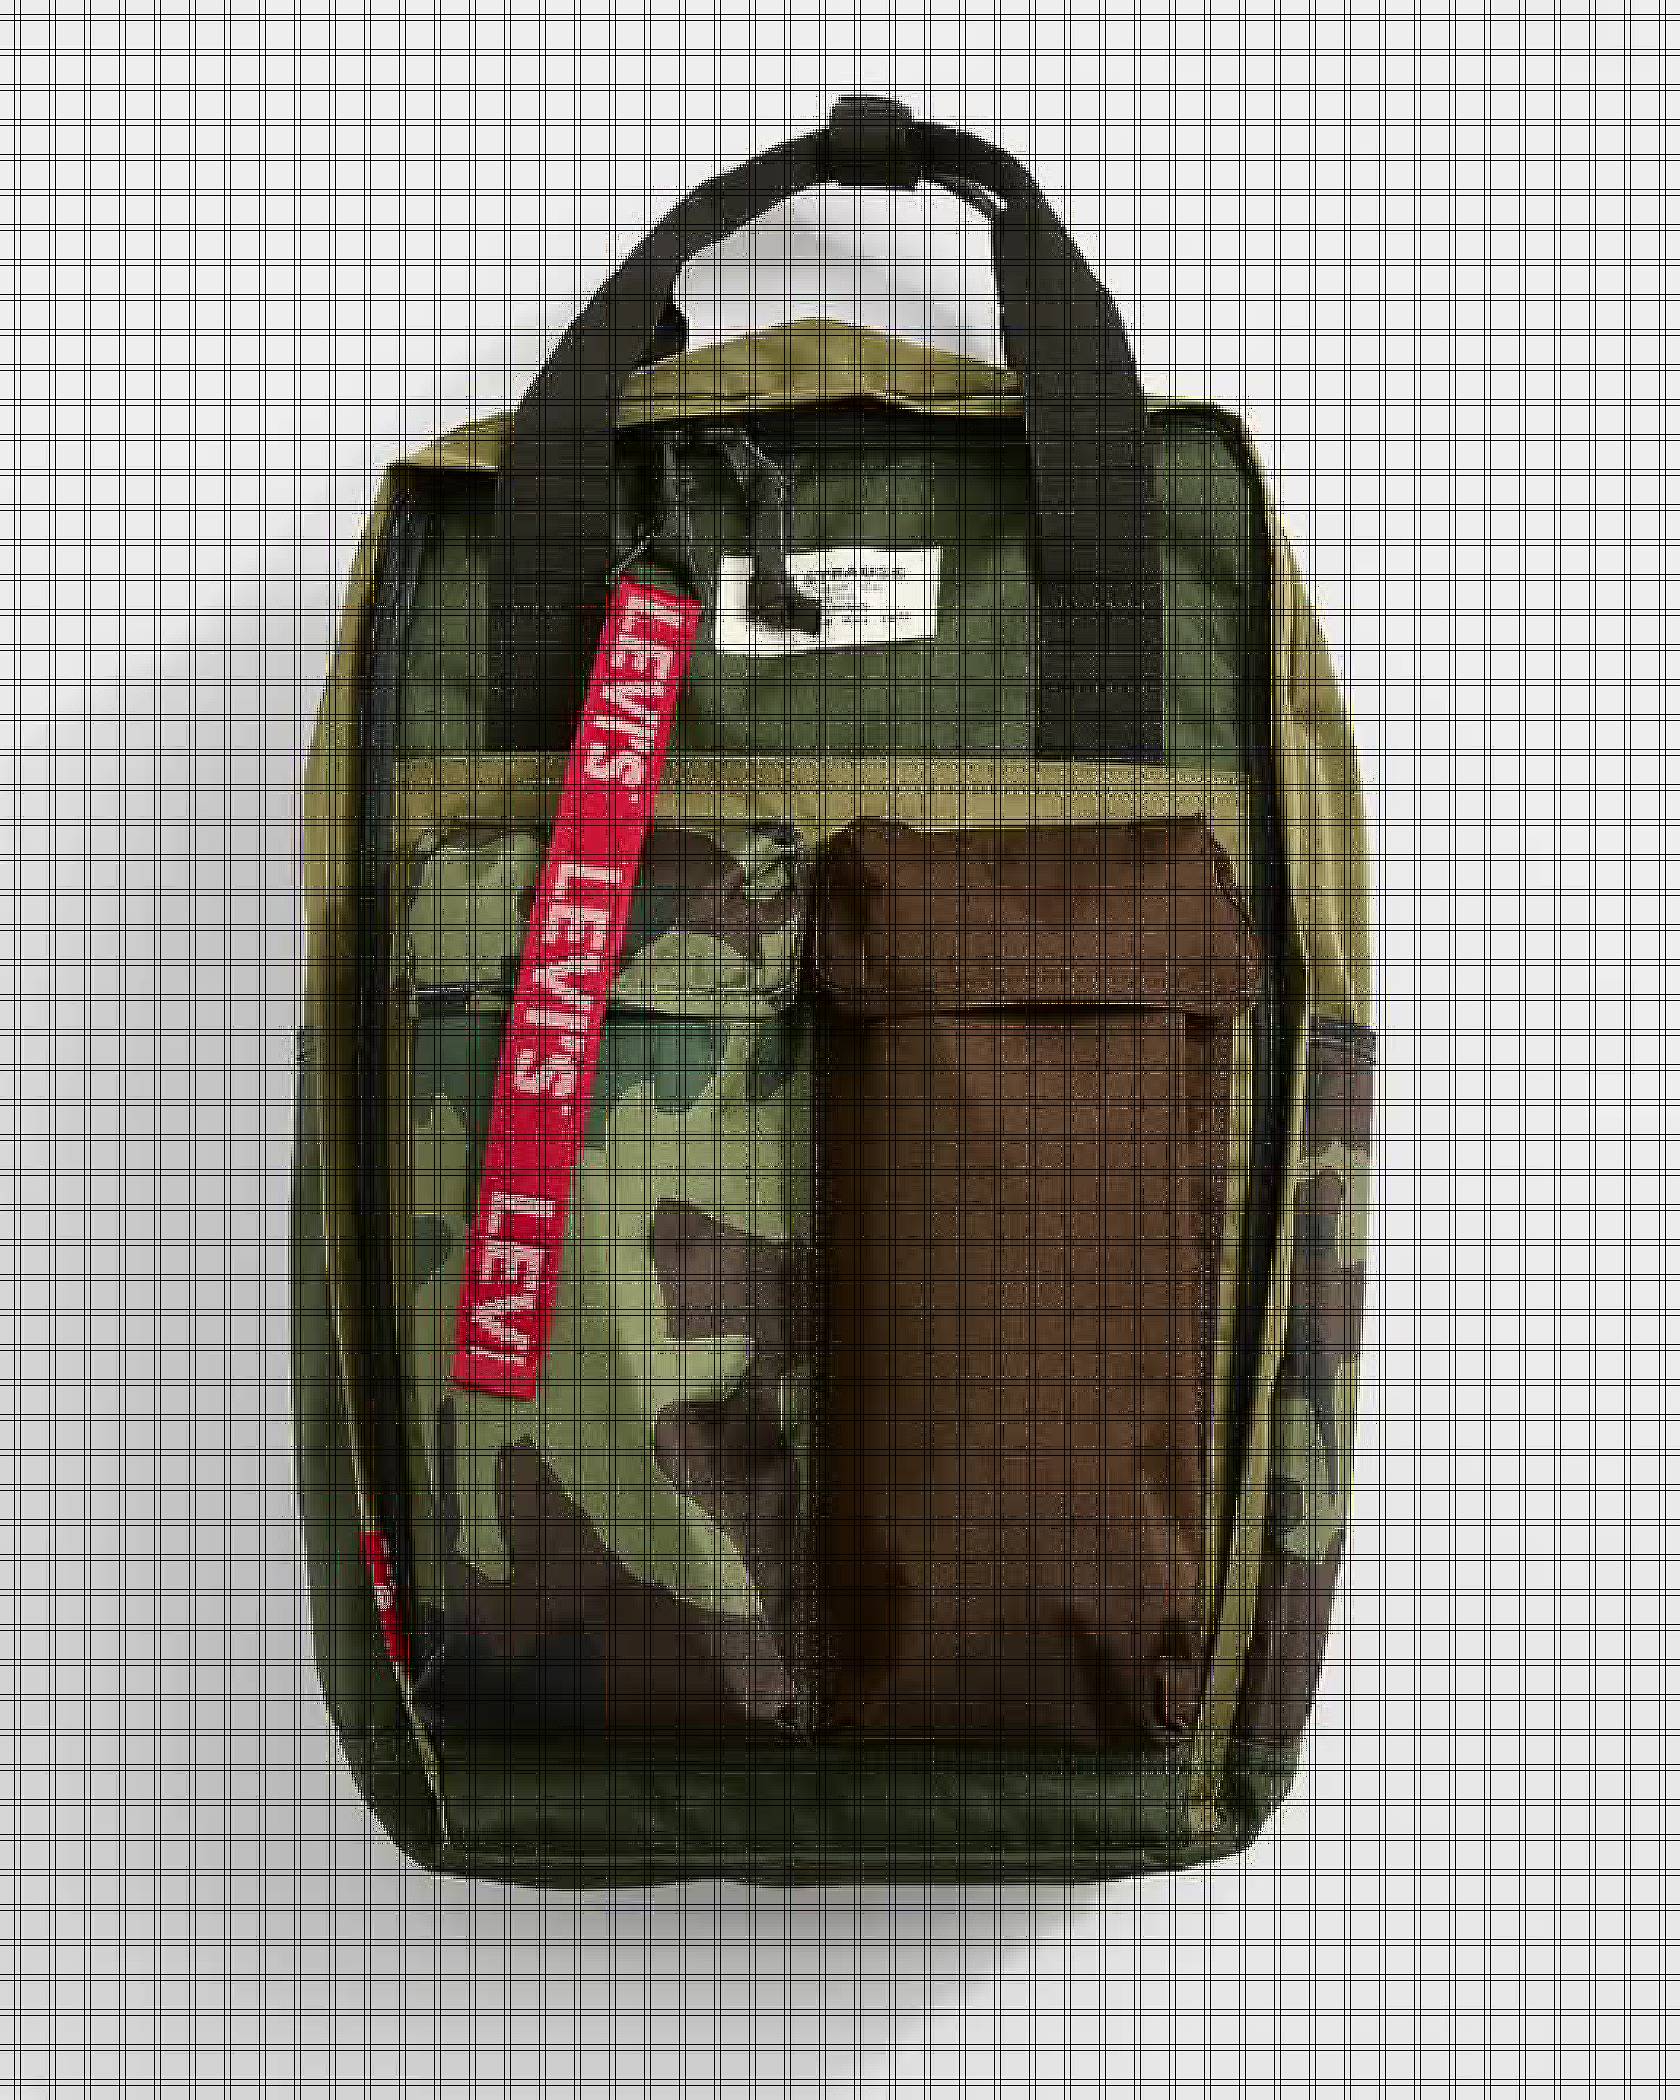 Camo backpack with red strap, gif